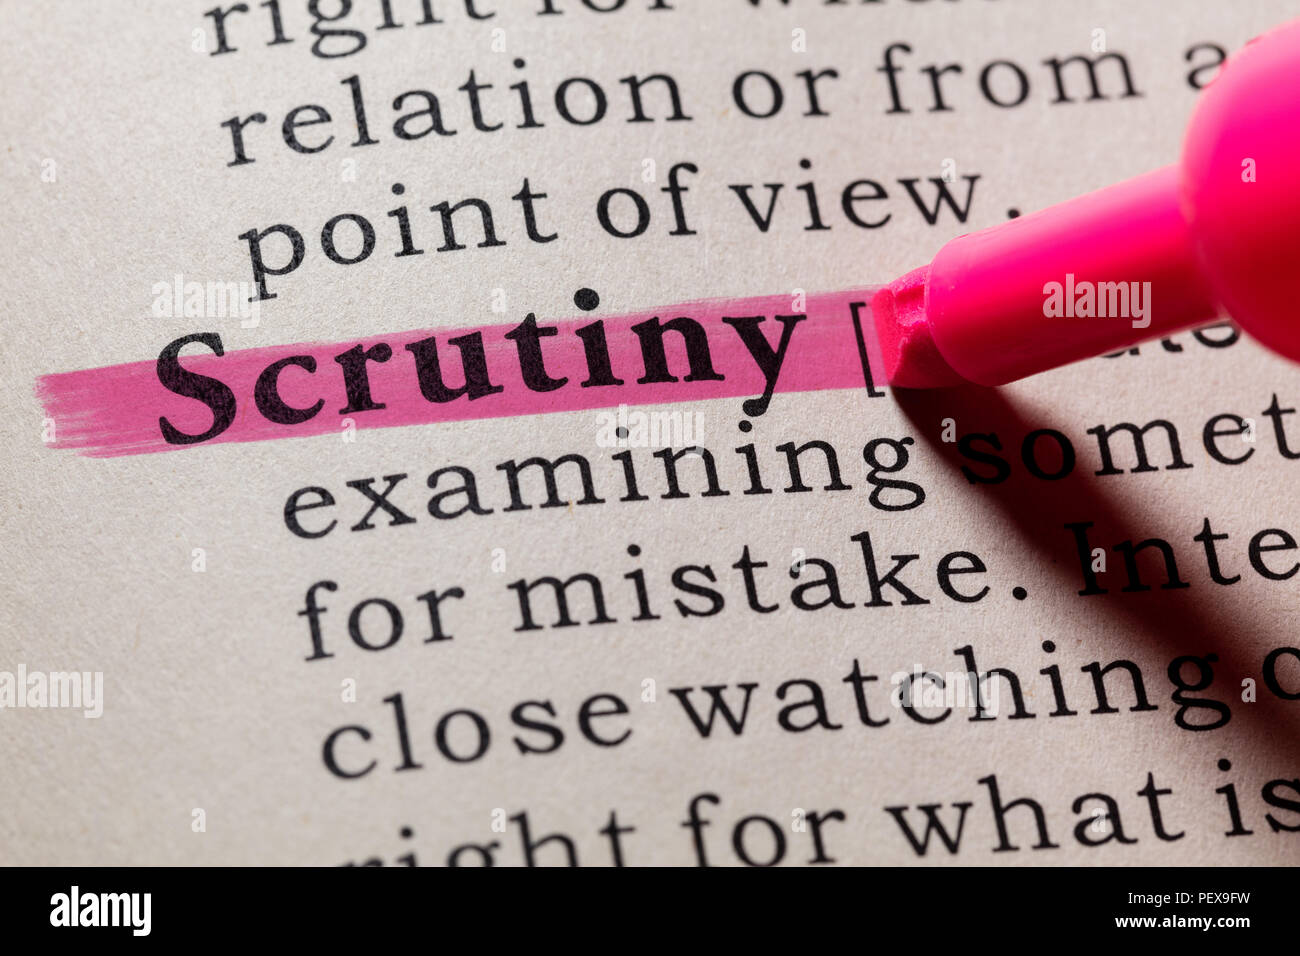 Fake Dictionary, Dictionary definition of the word scrutiny. including key descriptive words. Stock Photo